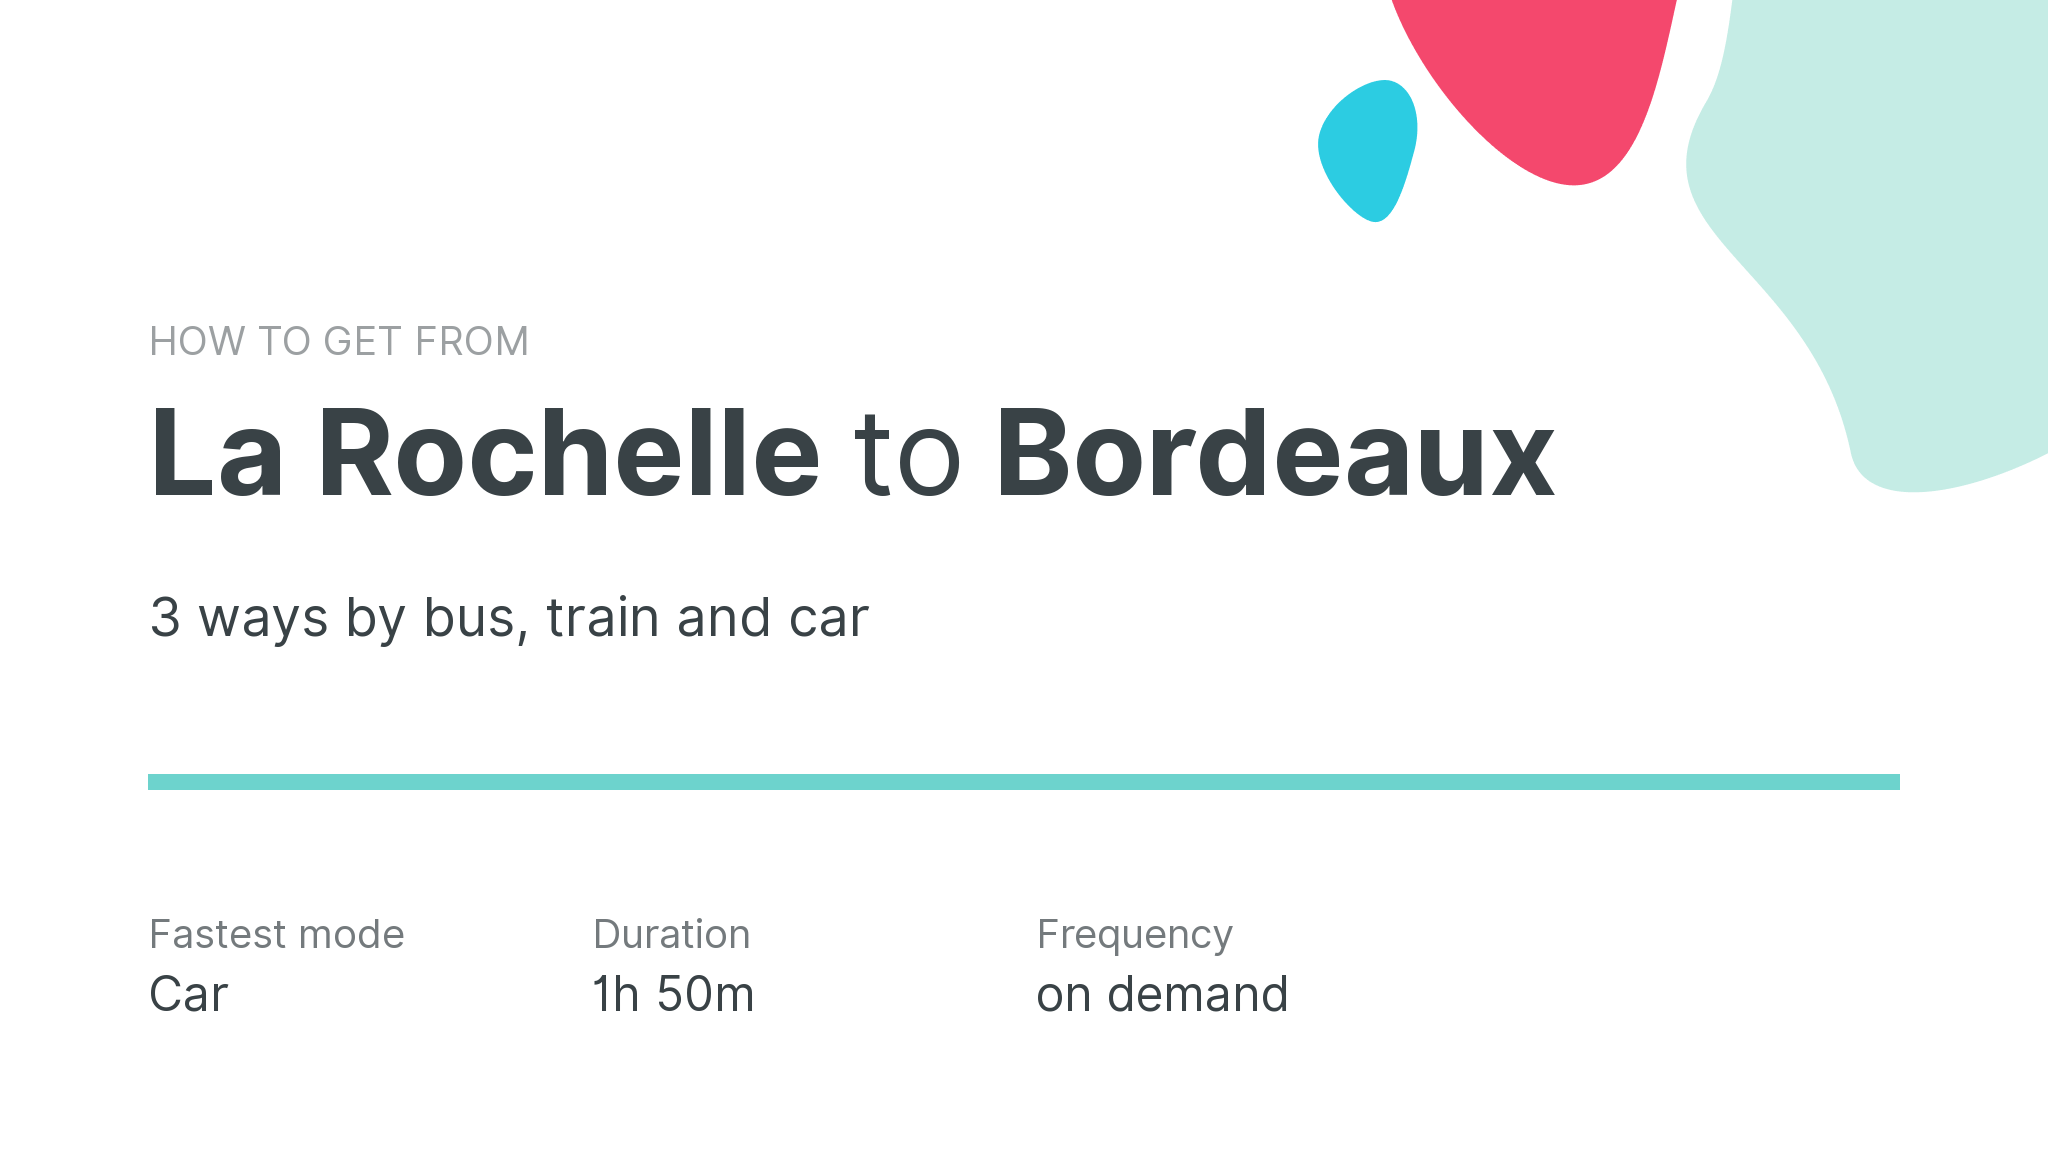 How do I get from La Rochelle to Bordeaux